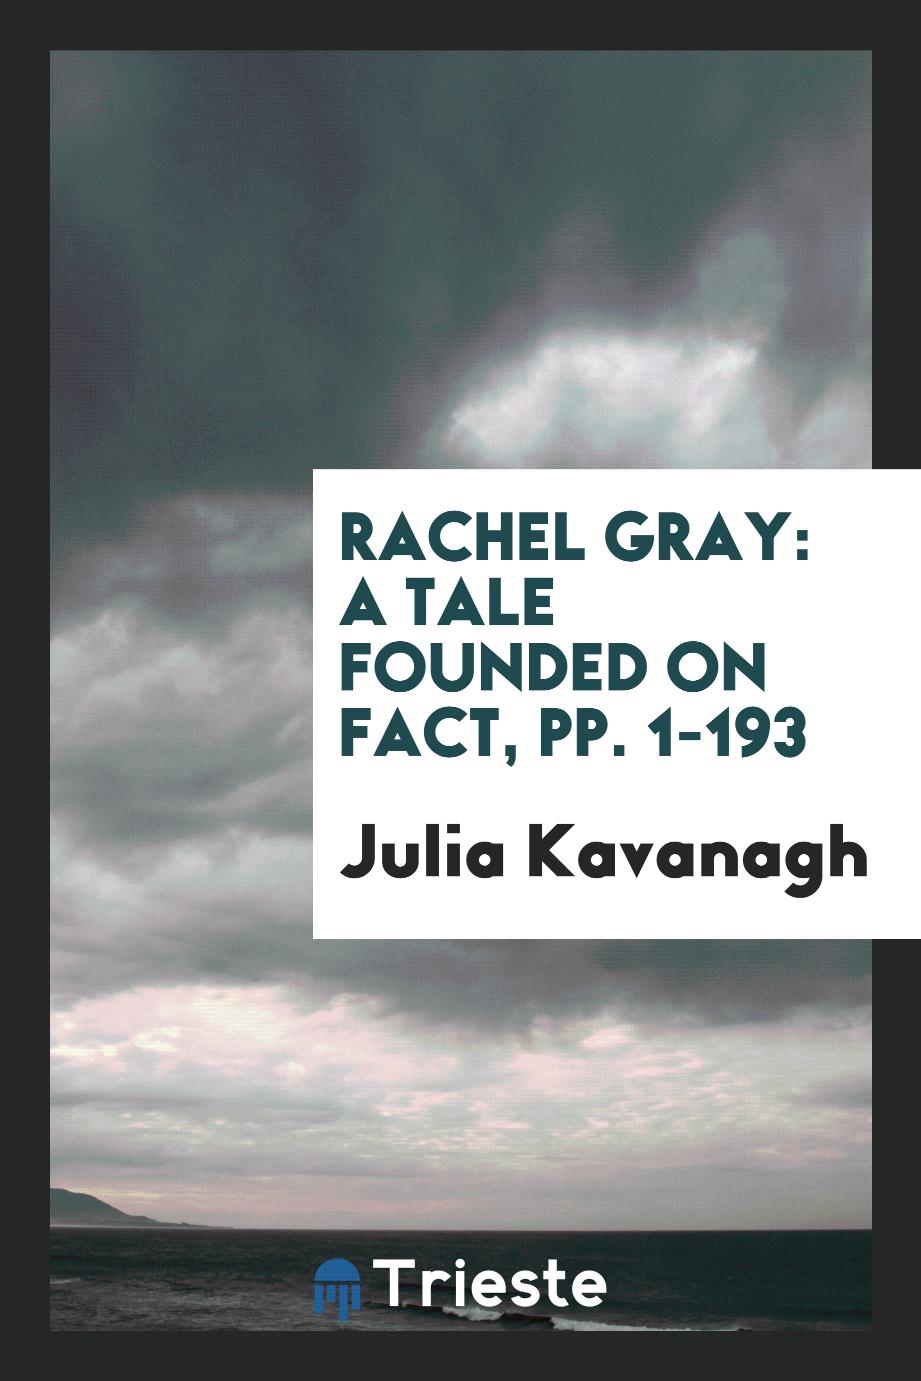 Rachel Gray: A Tale Founded on Fact, pp. 1-193